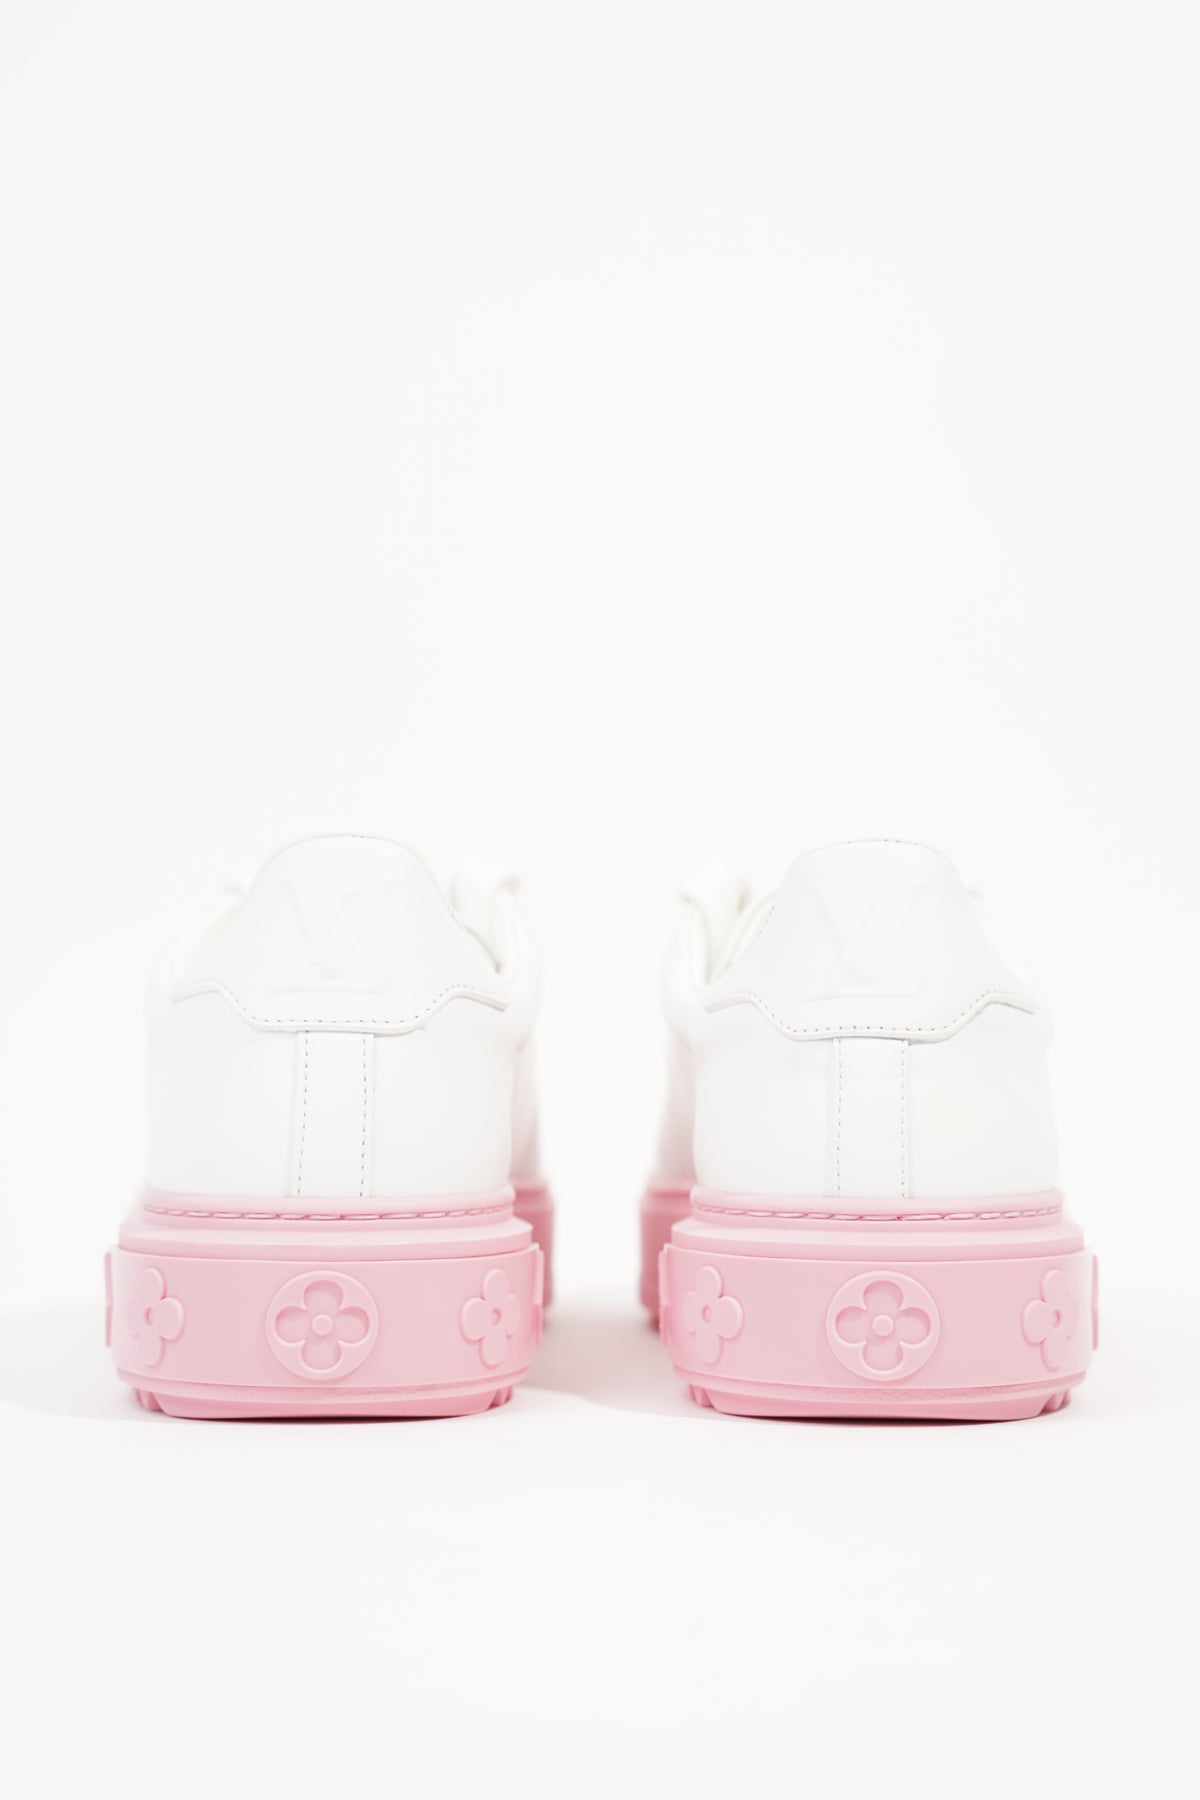 LOUIS VUITTON Time Out Bow Sneakers 37.5 White Pink 1269775